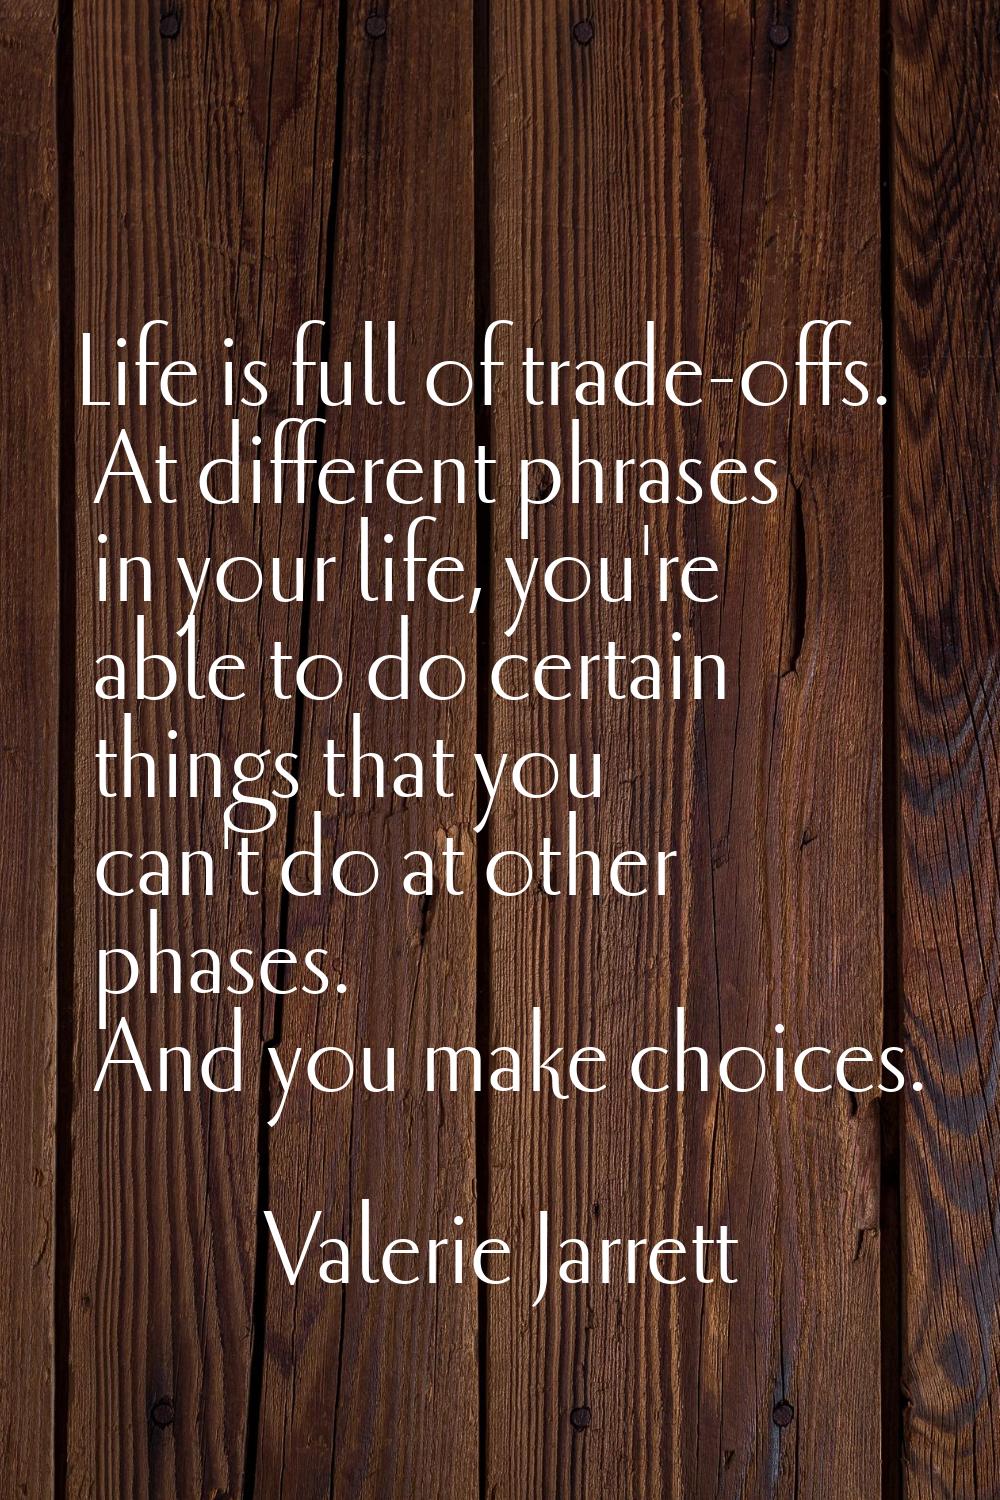 Life is full of trade-offs. At different phrases in your life, you're able to do certain things tha